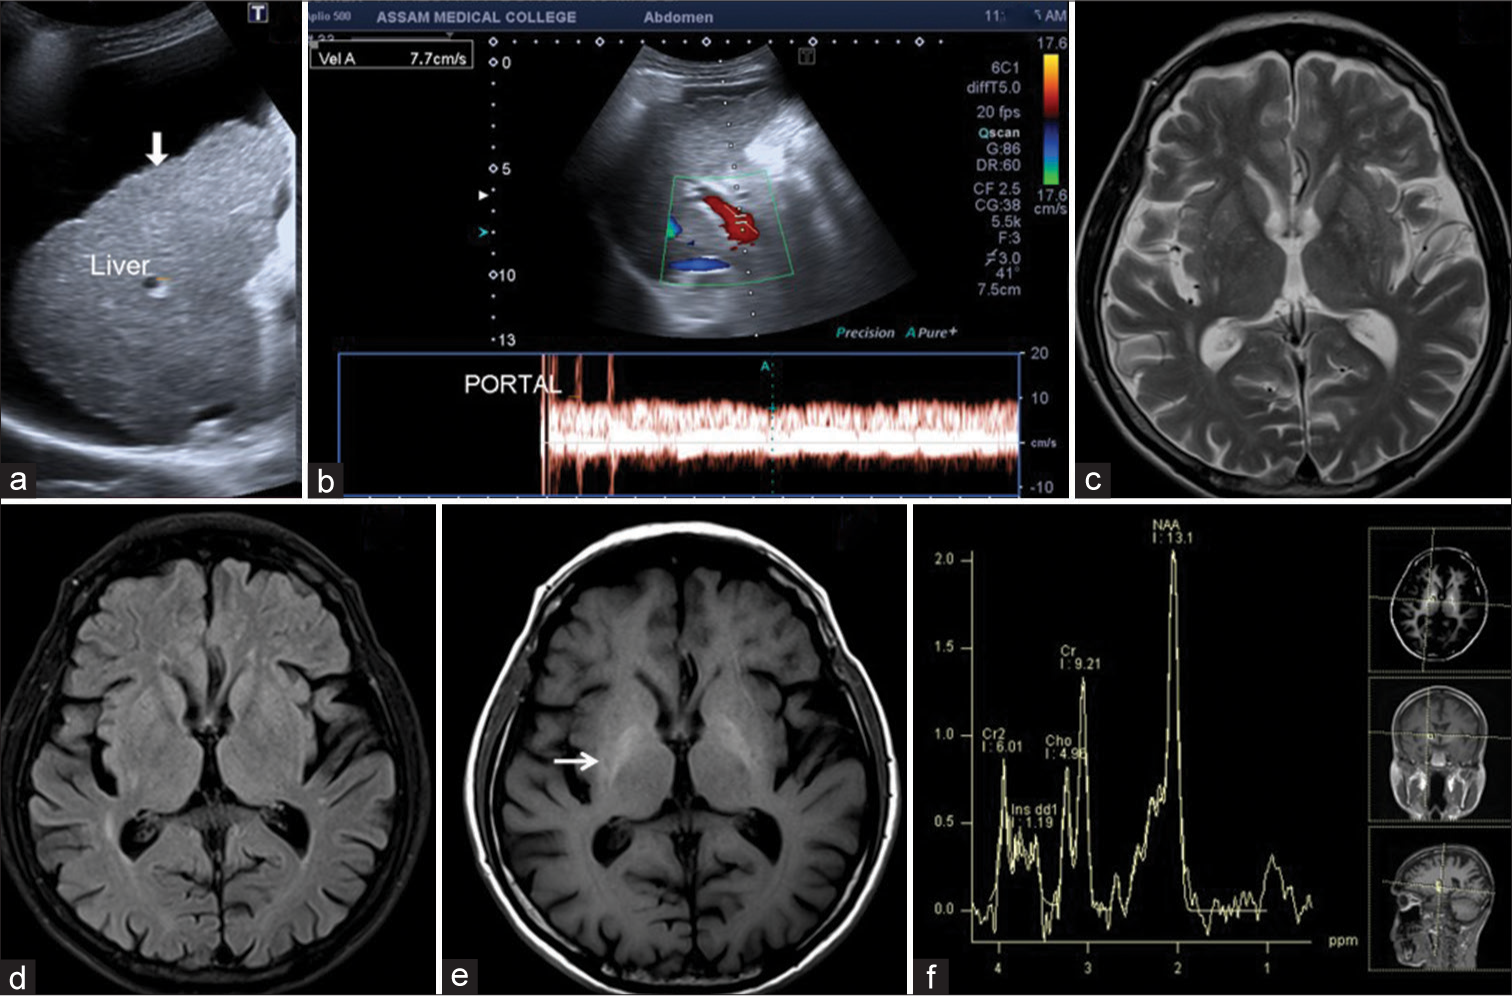 65-year-male patient with liver cirrhosis had mildly positive minimal hepatic encephalopathy. (a) USG image showed ascites with liver surface irregularities and nodularities (arrow). (b) Color Doppler image of portal vein flow velocity showed portal hypertension with a flow velocity of 7.7 cm/s. (c and d) Axial T2-weighted and fluid-attenuated inversion recovery images showed diffuse cerebral atrophy. (e) Axial T1-weighted image showed mildly T1 hyperintensities in the bilateral globus pallidi (arrow). (f) Low time of echo magnetic resonance spectroscopy showed a minimally raised Glx peak.